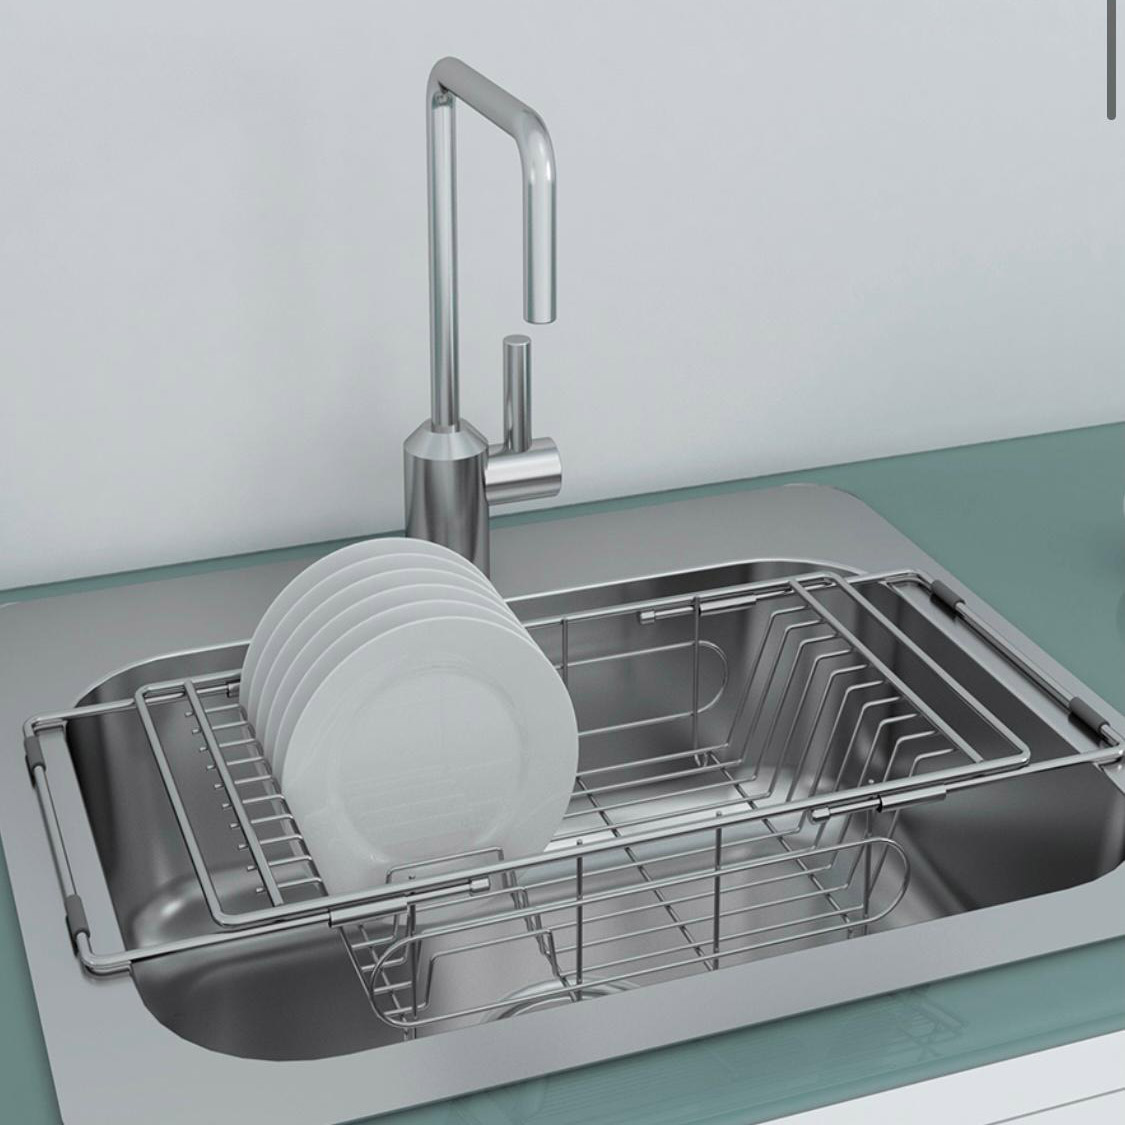 Buy Portable Sink Dish Dranke Online | Manufacturing Production Services | Qetaat.com